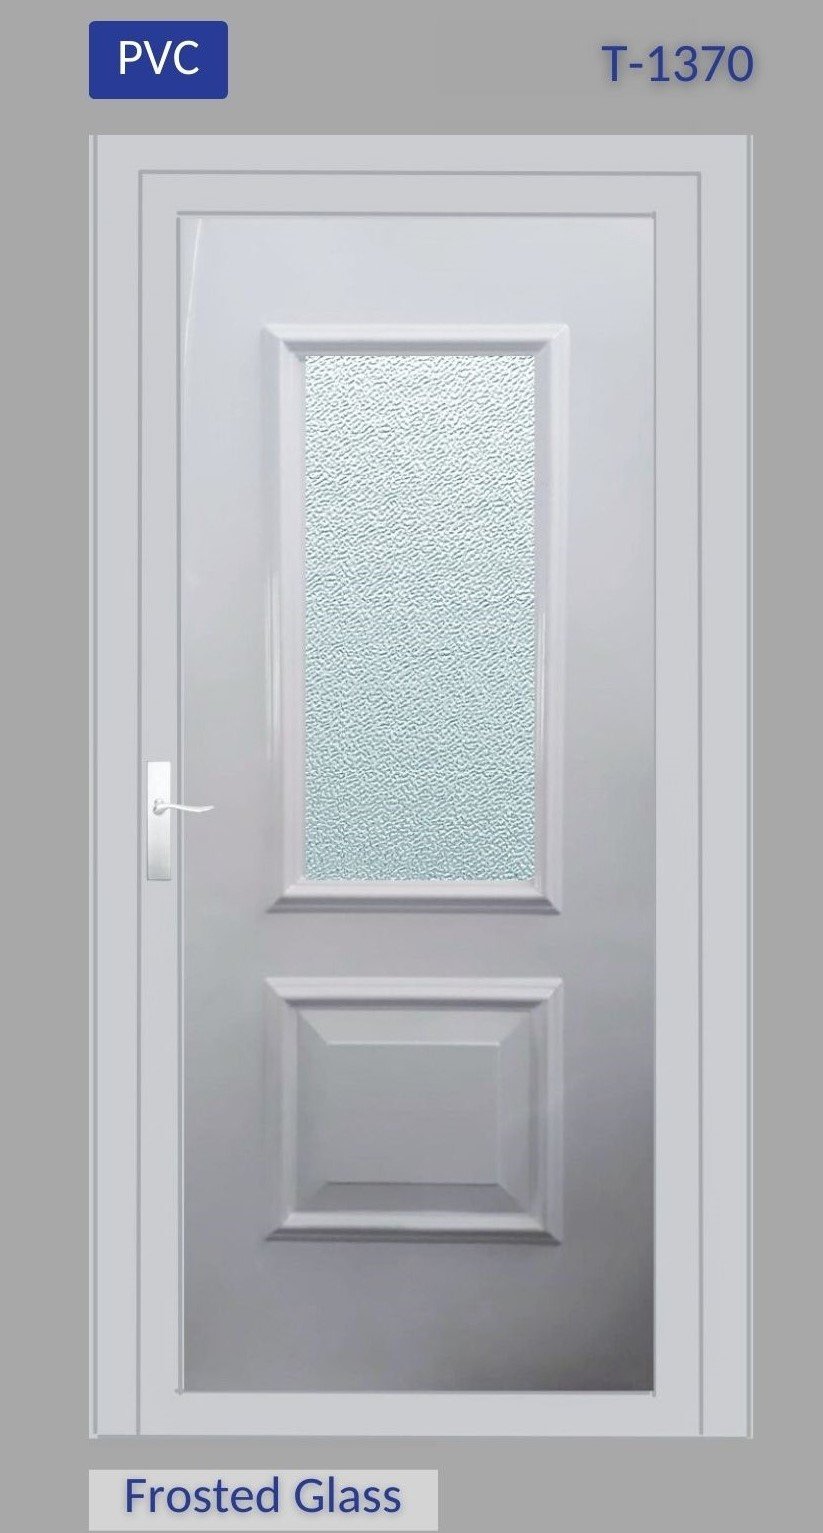 T-1370 Frosted Glass